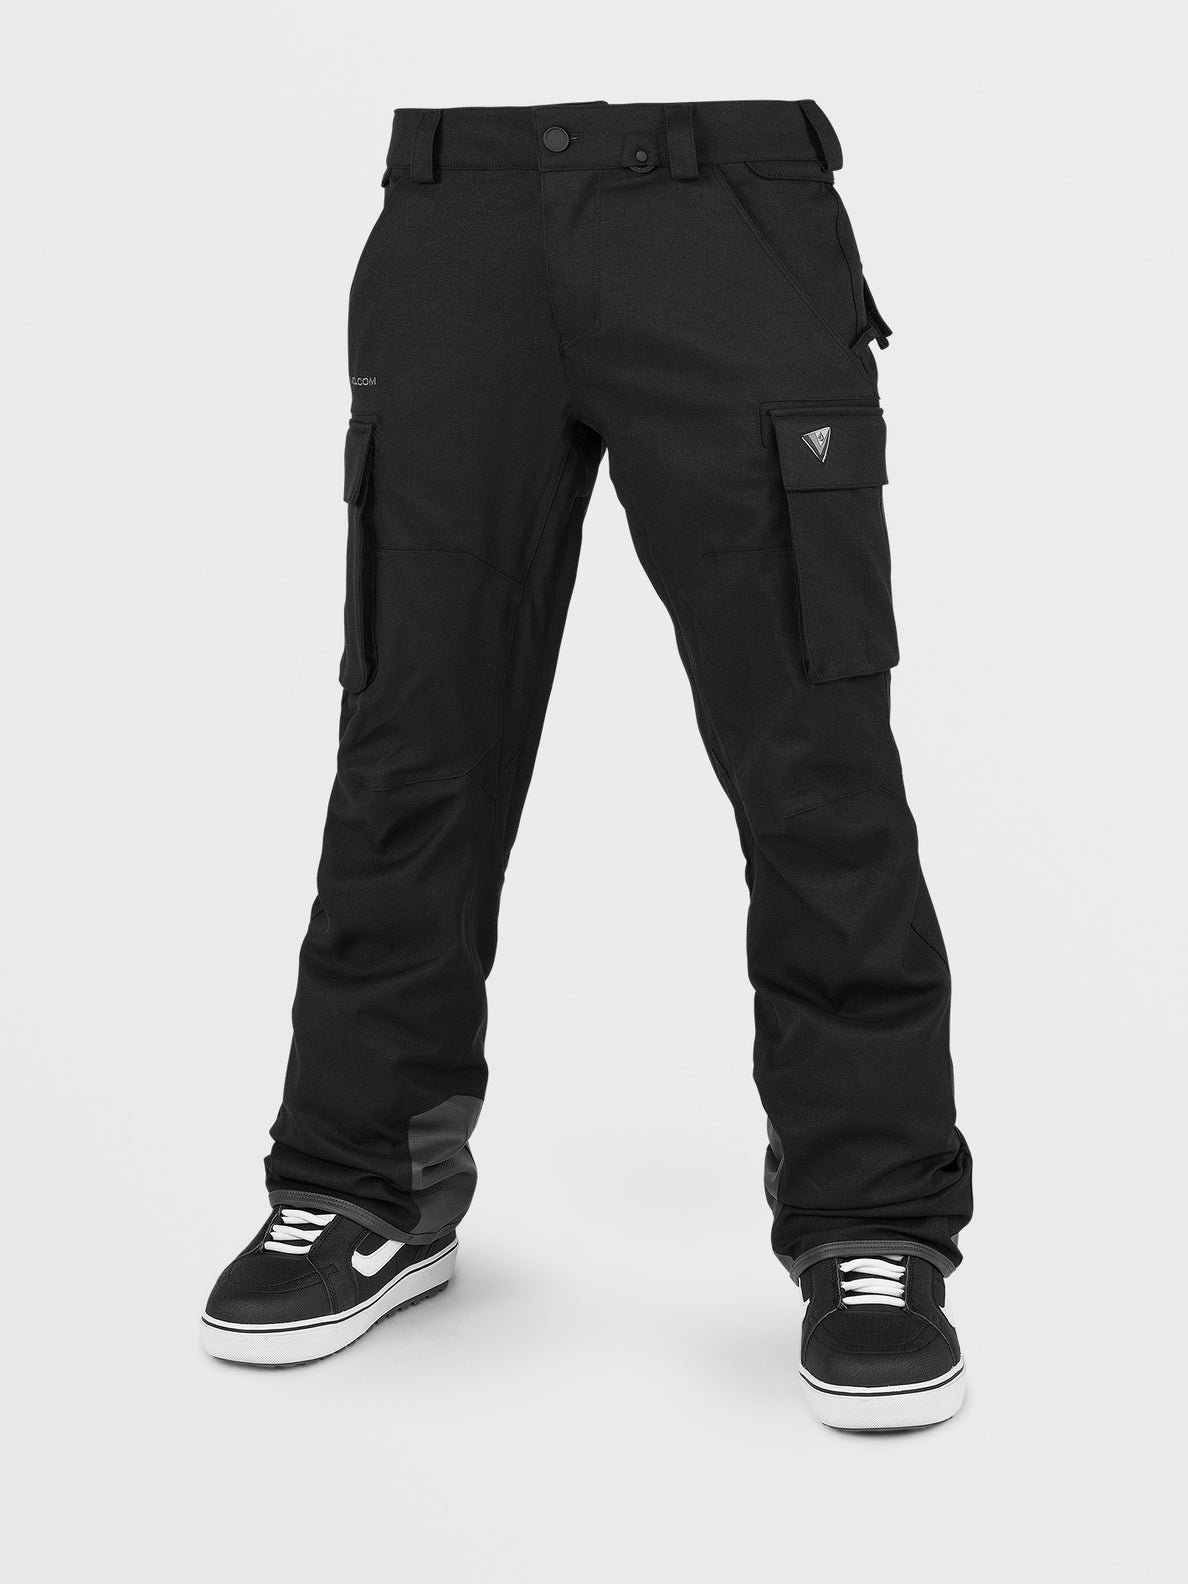 Mens New Articulated Pants - Black (G1352407_BLK) [F]